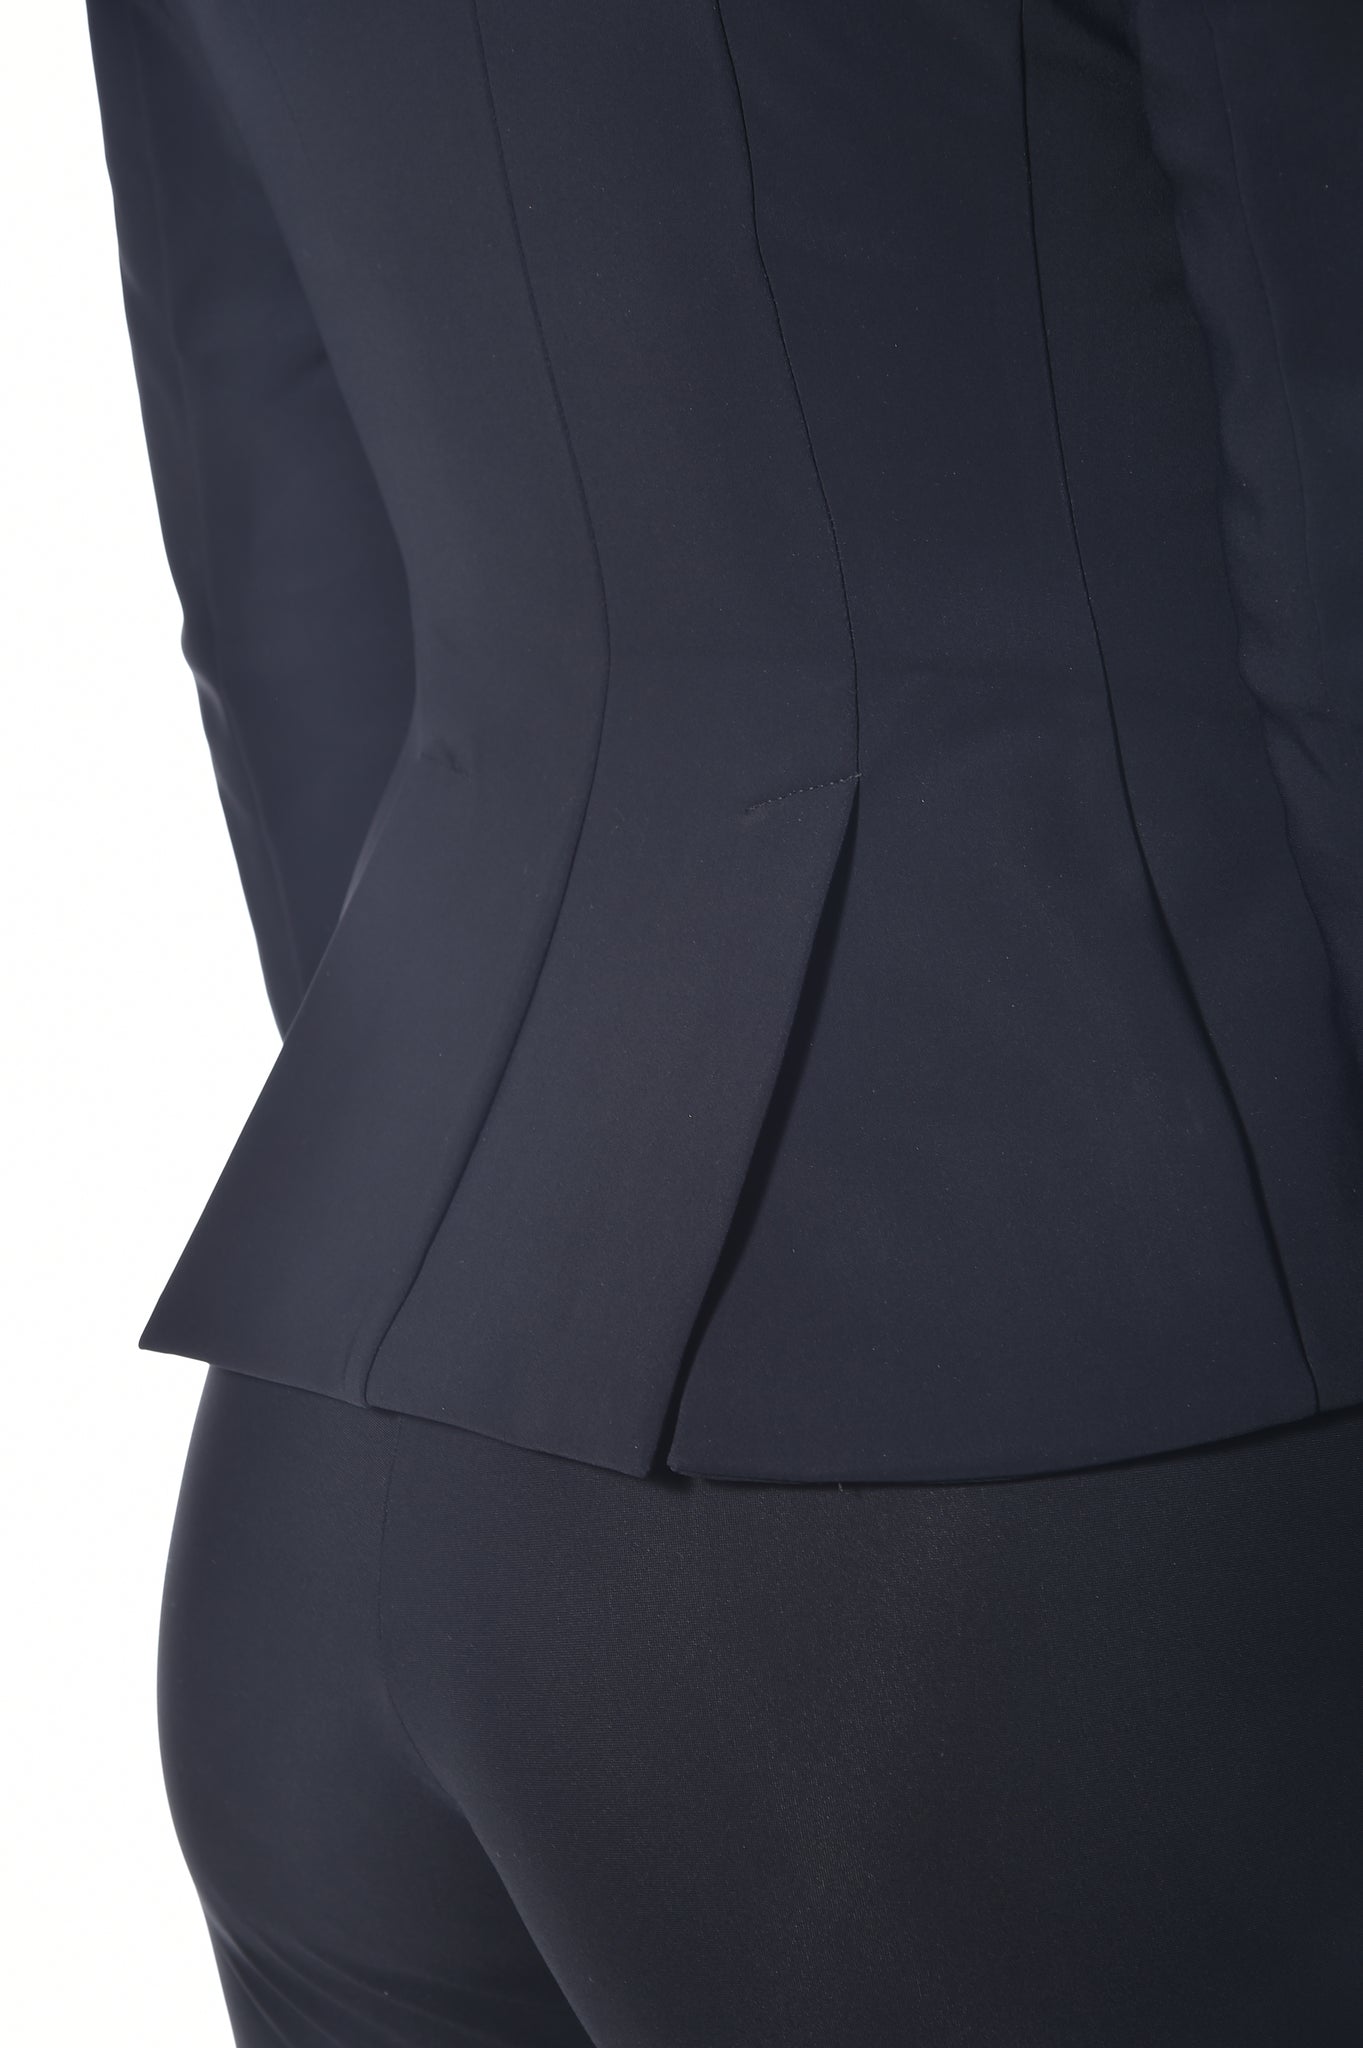 Hourglass Fit Jacket